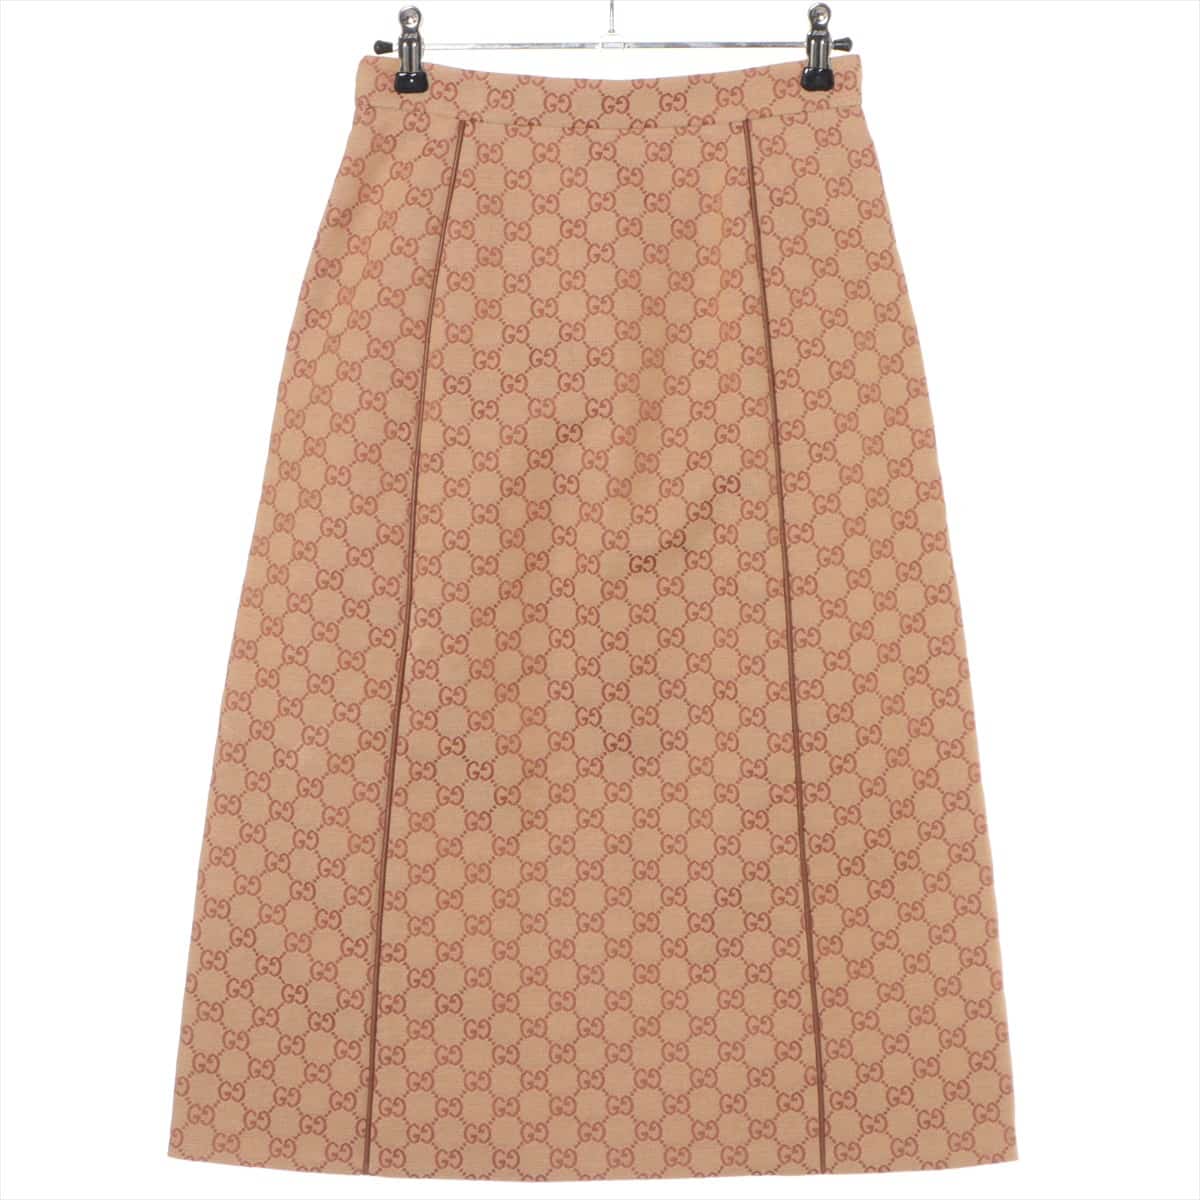 Gucci GG jacquard 18 years Cotton & polyester Skirt 36 Ladies' Beige  572348